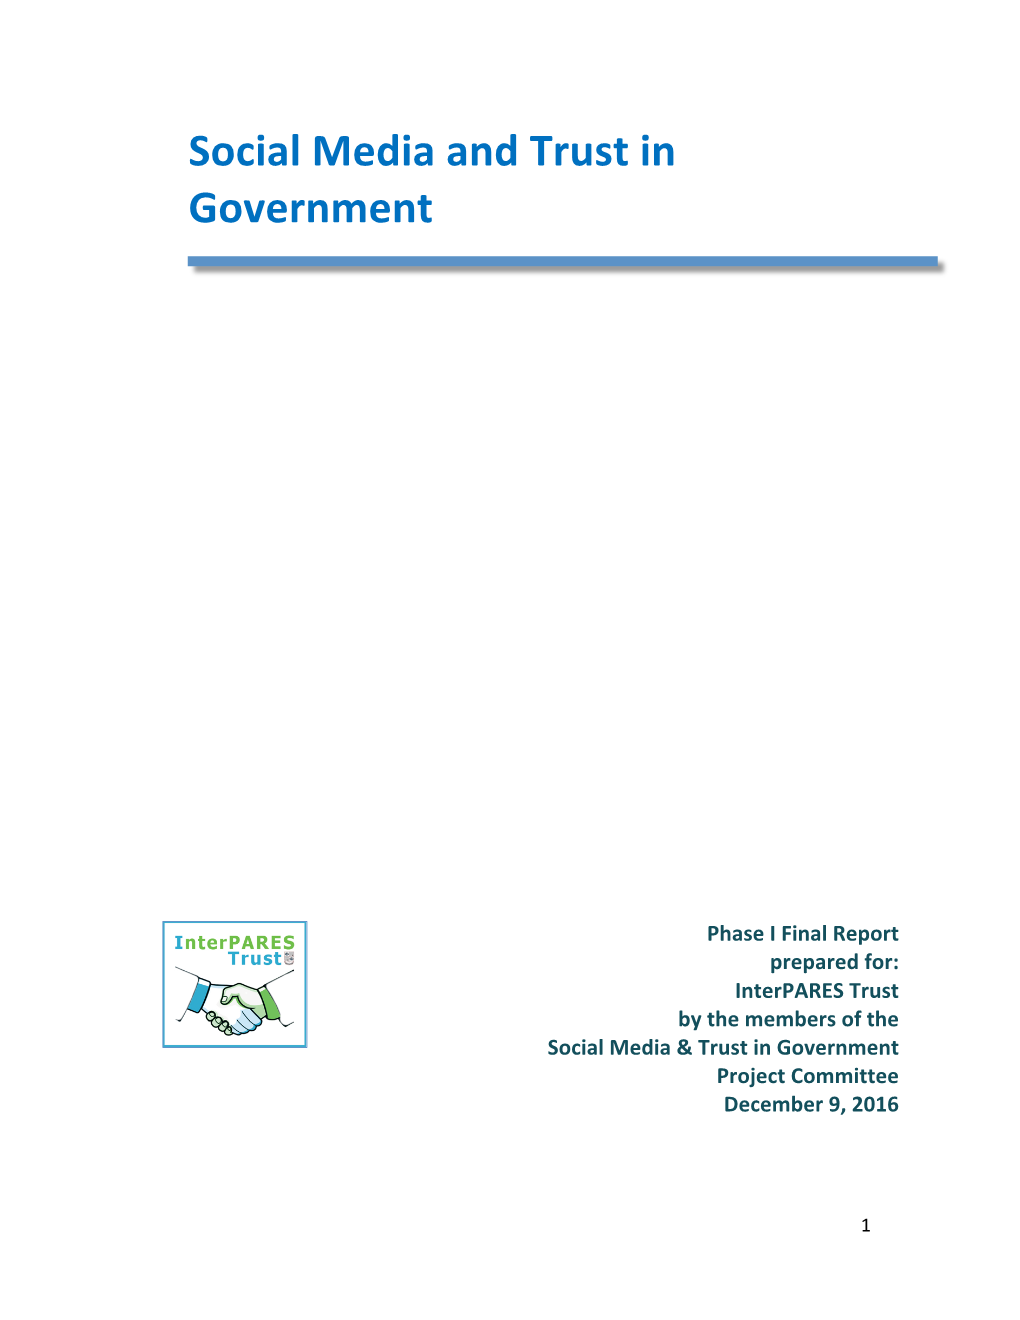 Social Media and Trust in Government